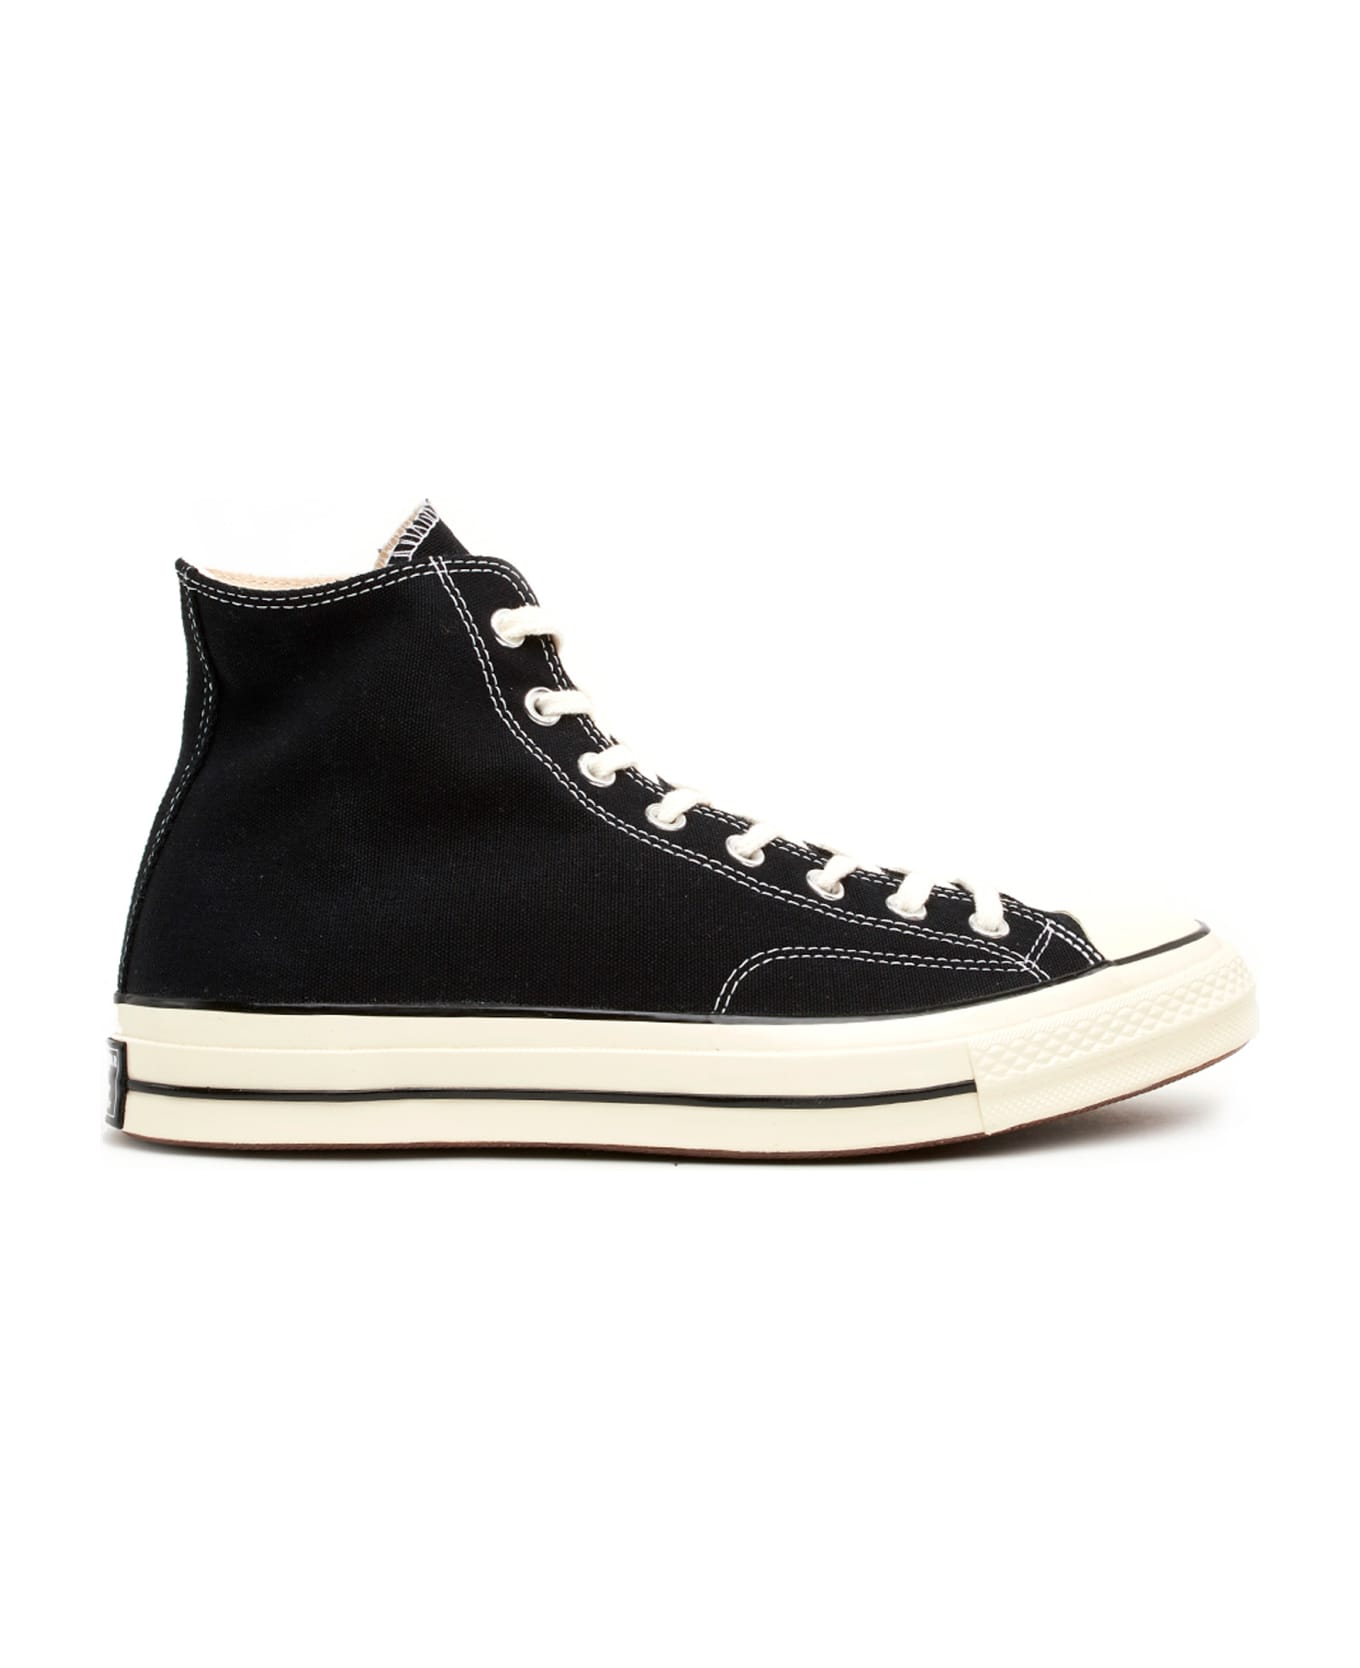 Converse 'chuck Taylor 1970s' Shoes | italist